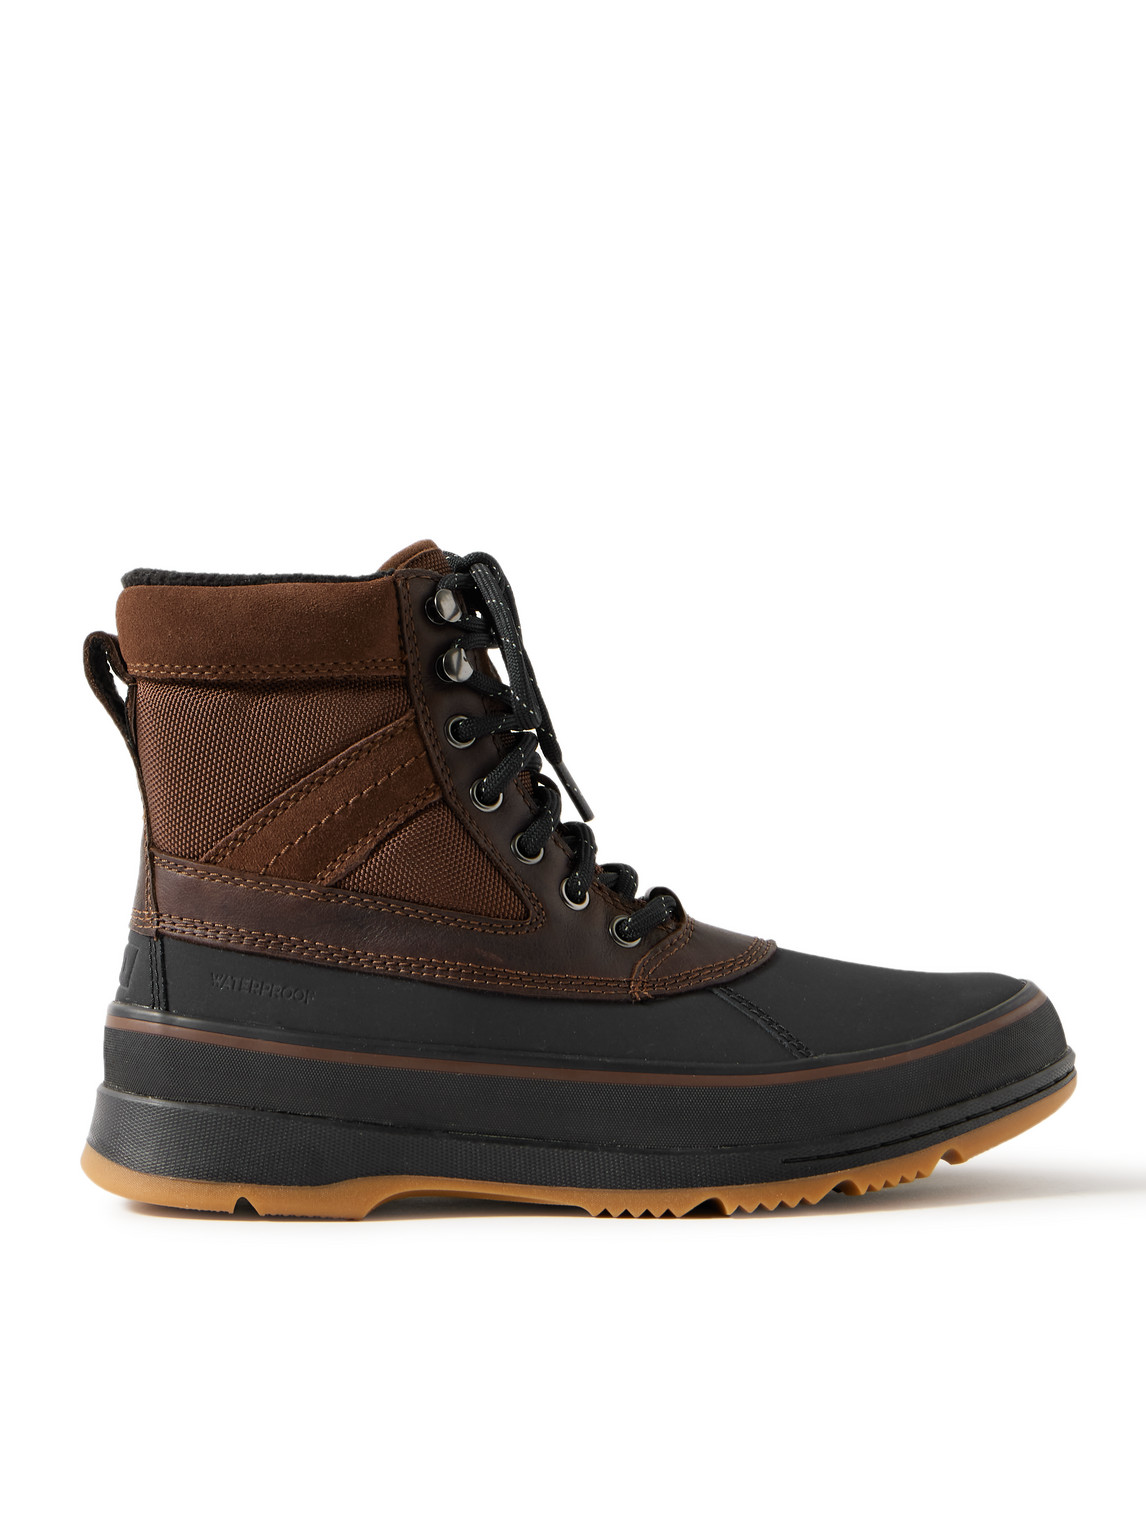 Sorel - Ankeny™ II Leather- and Suede-Trimmed Nylon and Rubber Boots - Men - Brown - US 8 von Sorel